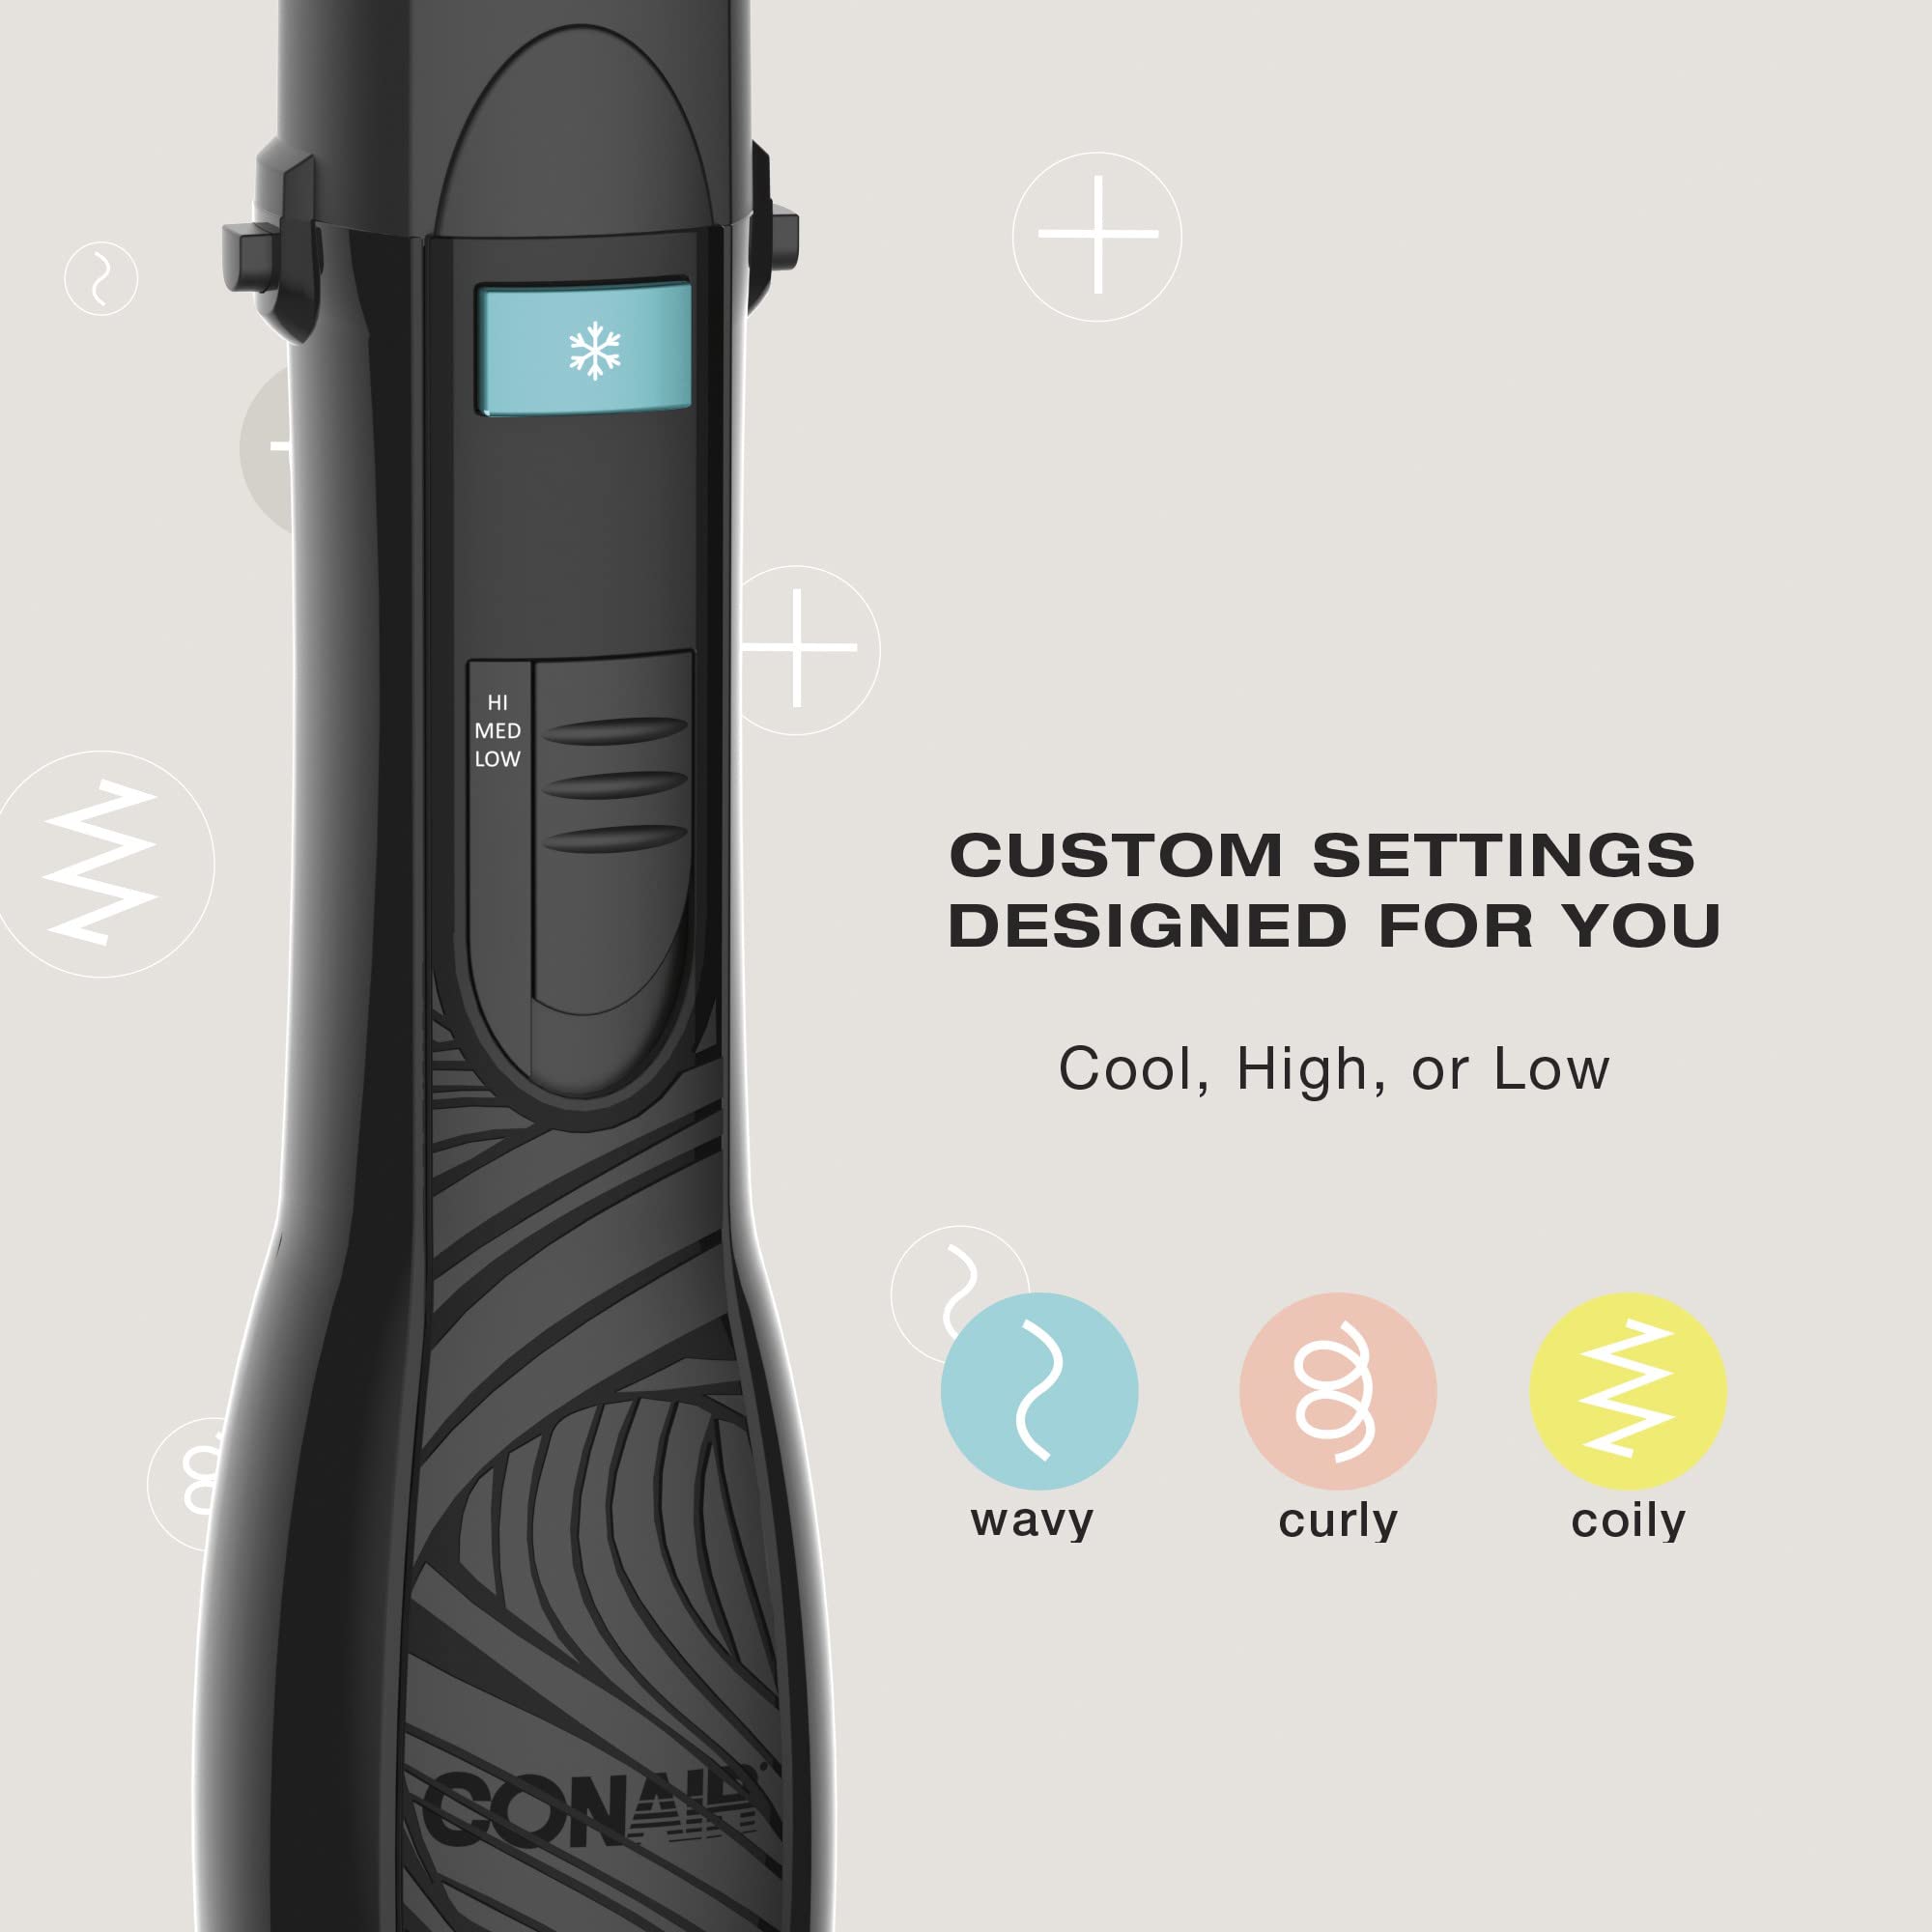 Conair The Curl Collective 3-in-1 Blowout Kit, 3 Interchangeable Brush Attachments to Create Your Perfect Blowout